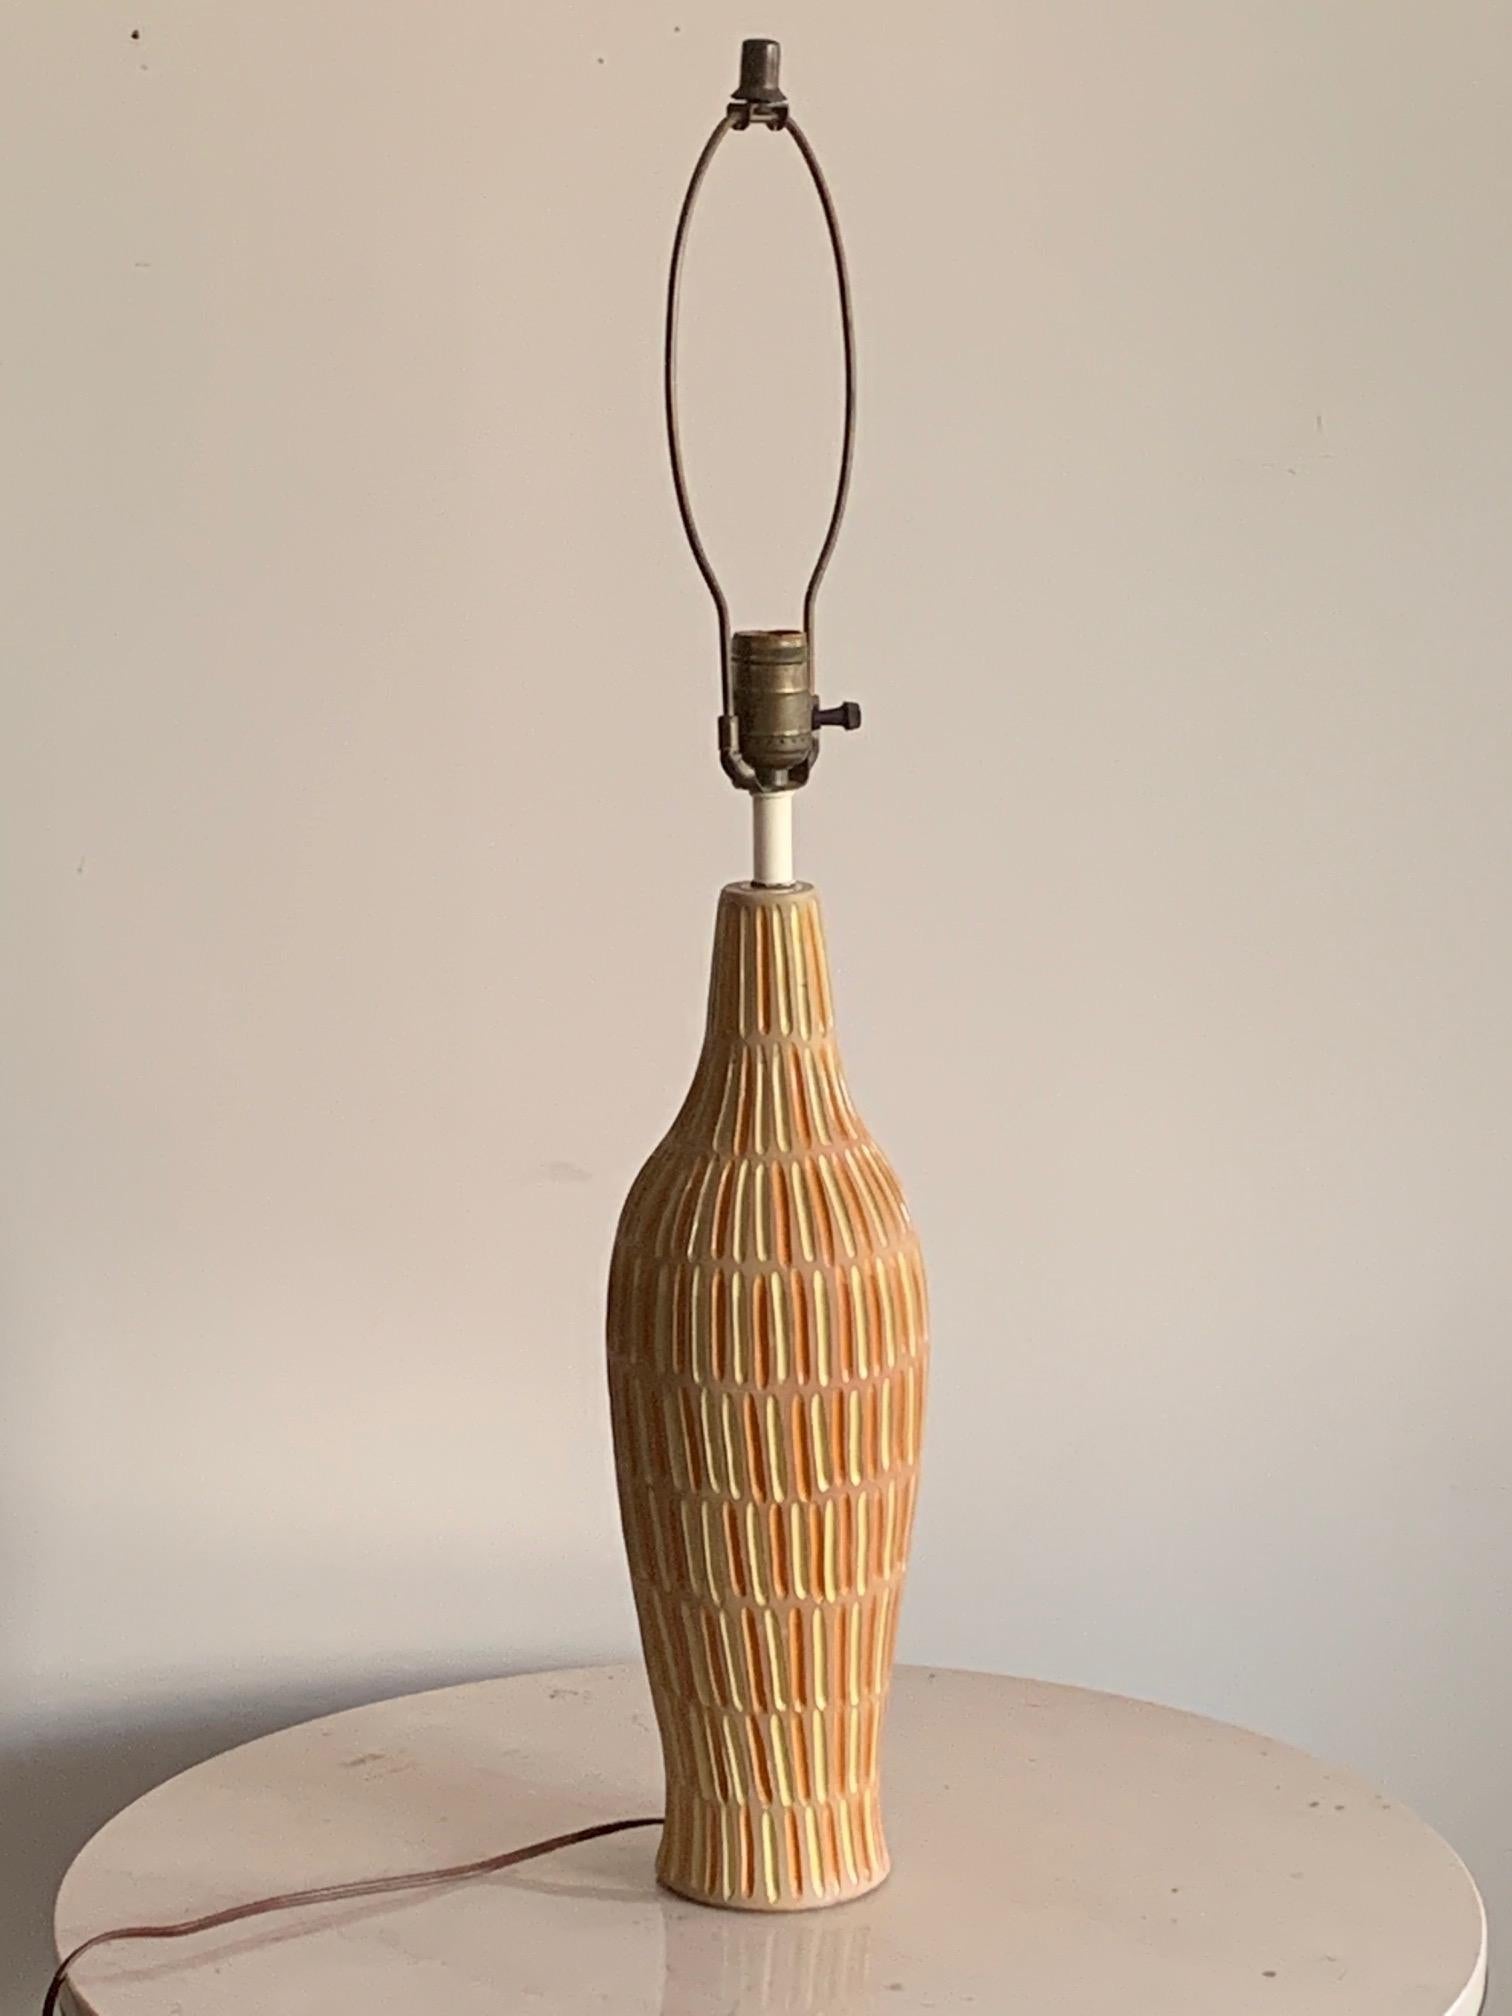 A Classic Italian ceramic lamp made for Raymor, circa 1960s. Interesting bottle shape with alternating yellow and orange stripes.